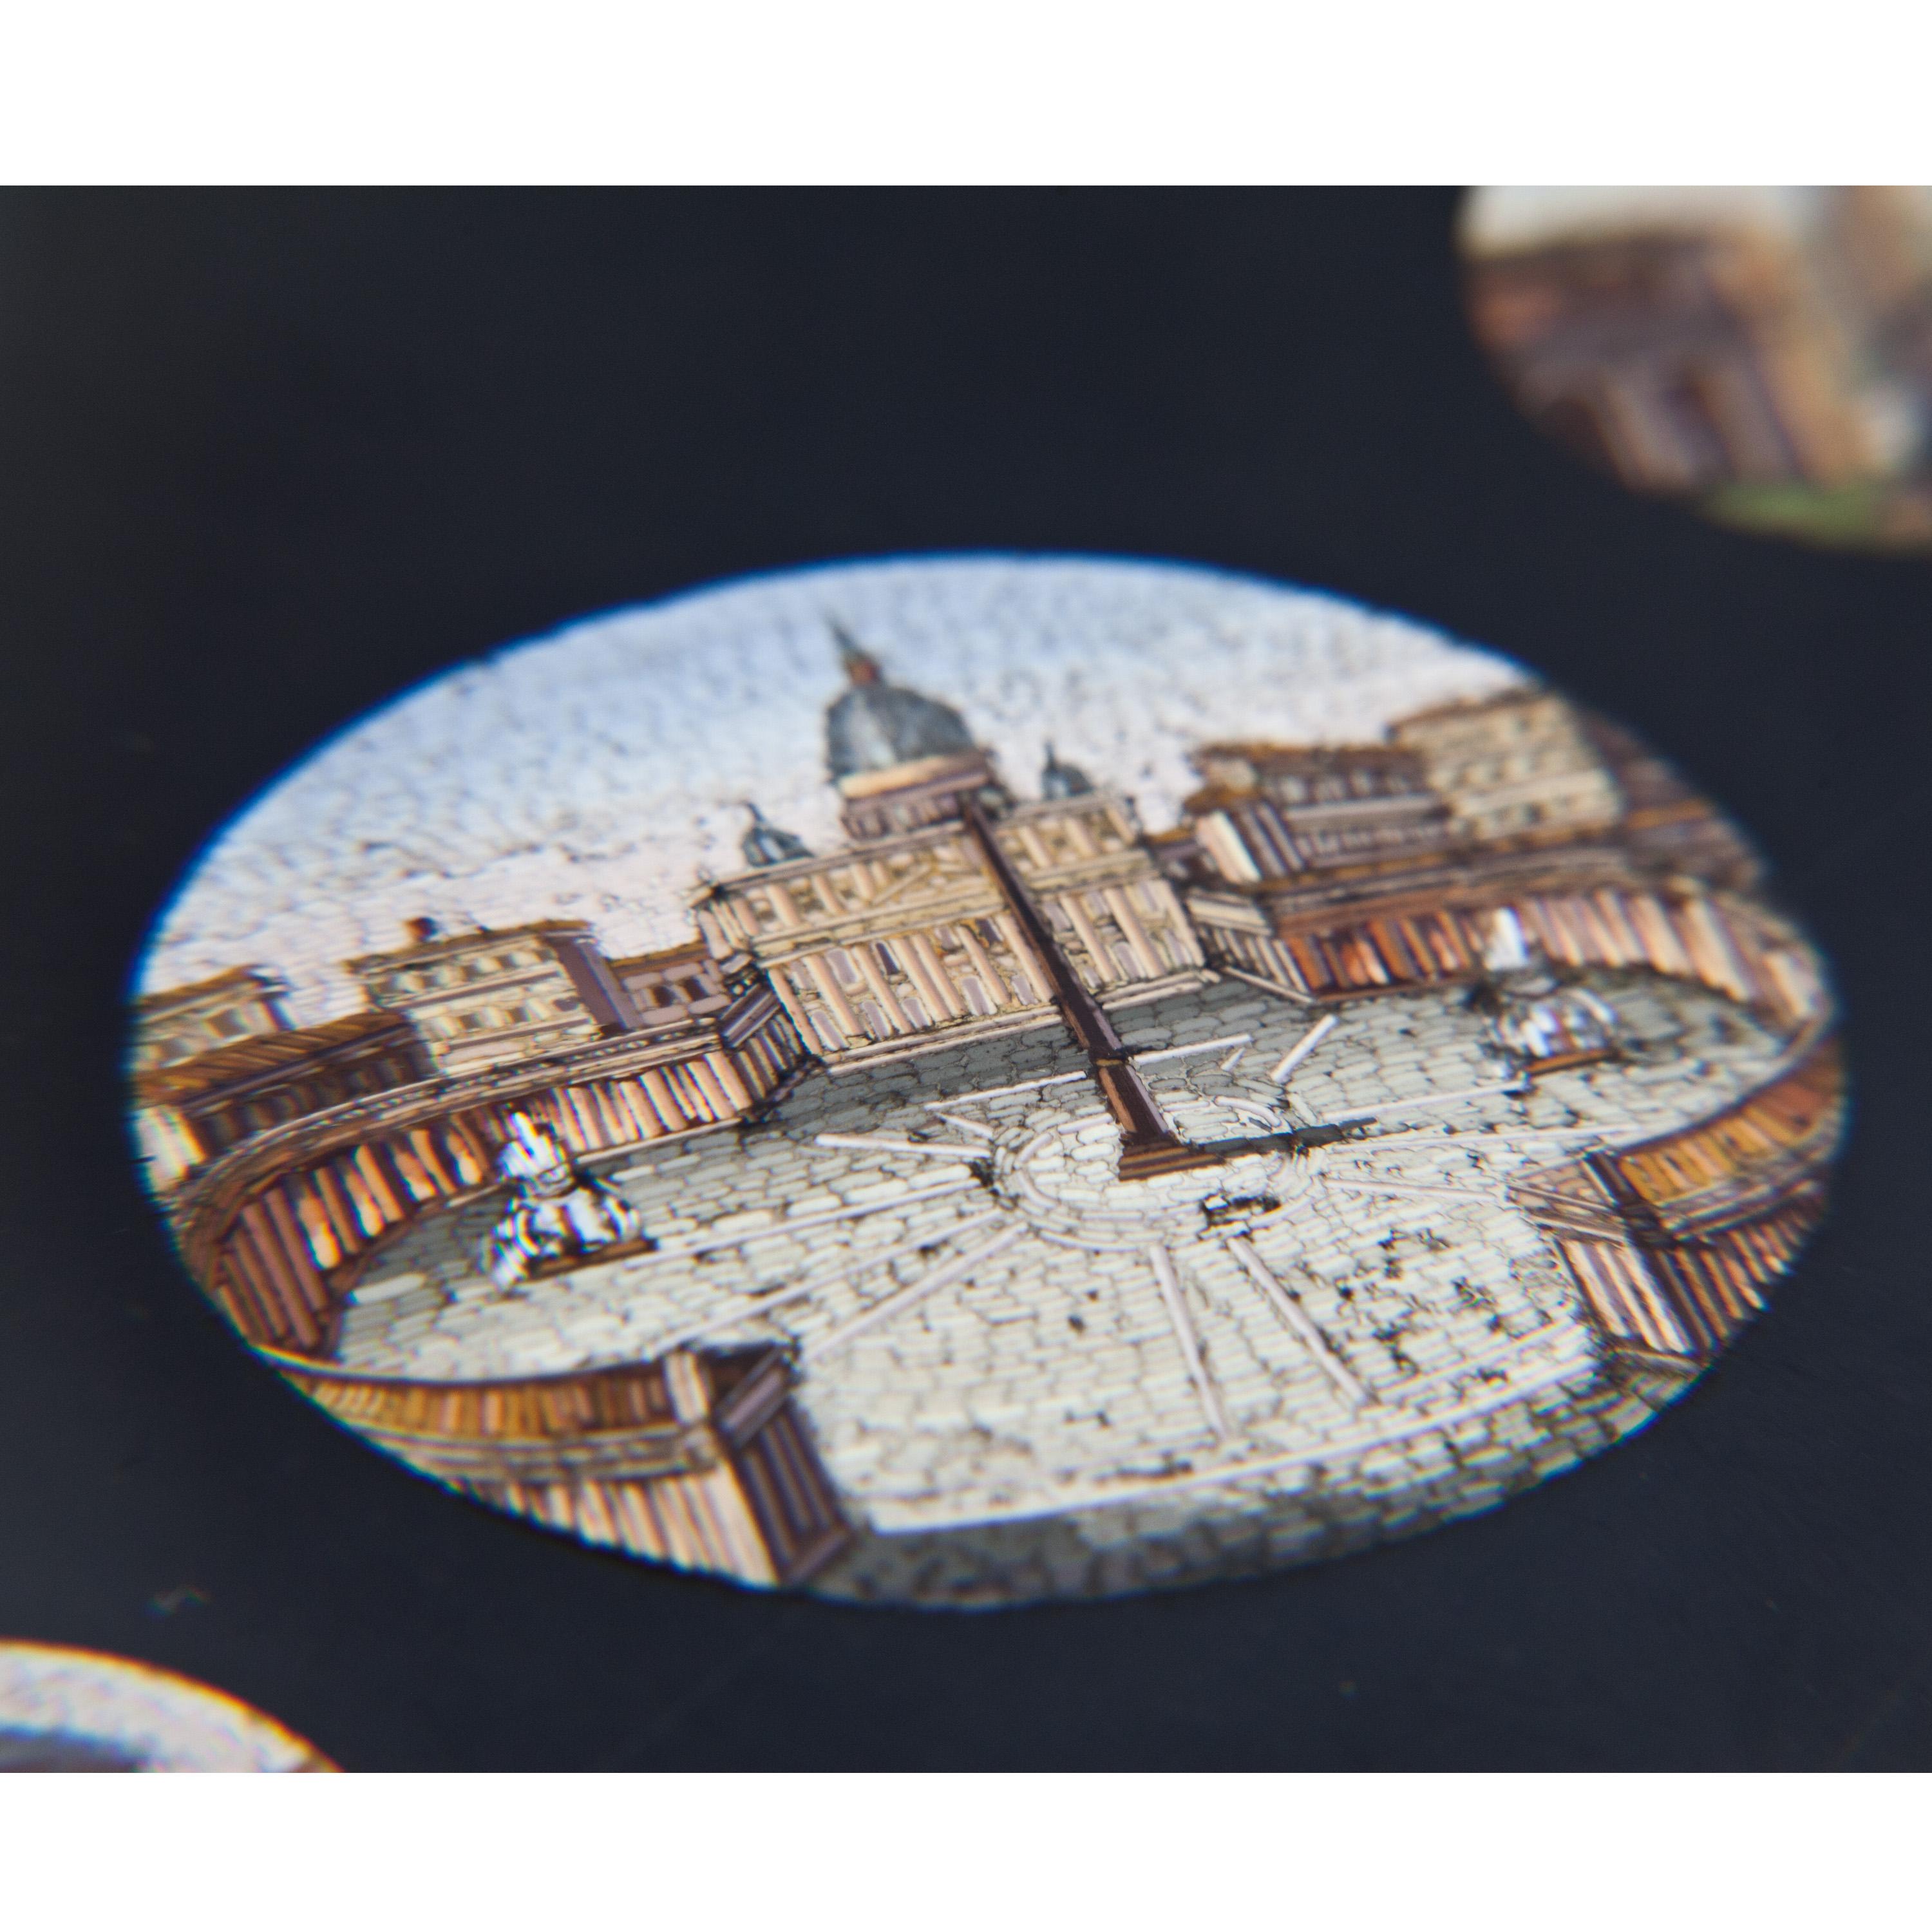 Five micromosaics inlaid in black marble with views of Rome: Colosseum, style Peter's square, Roman Forum, Pantheon and Temple of Vesta/Hercules Victor.